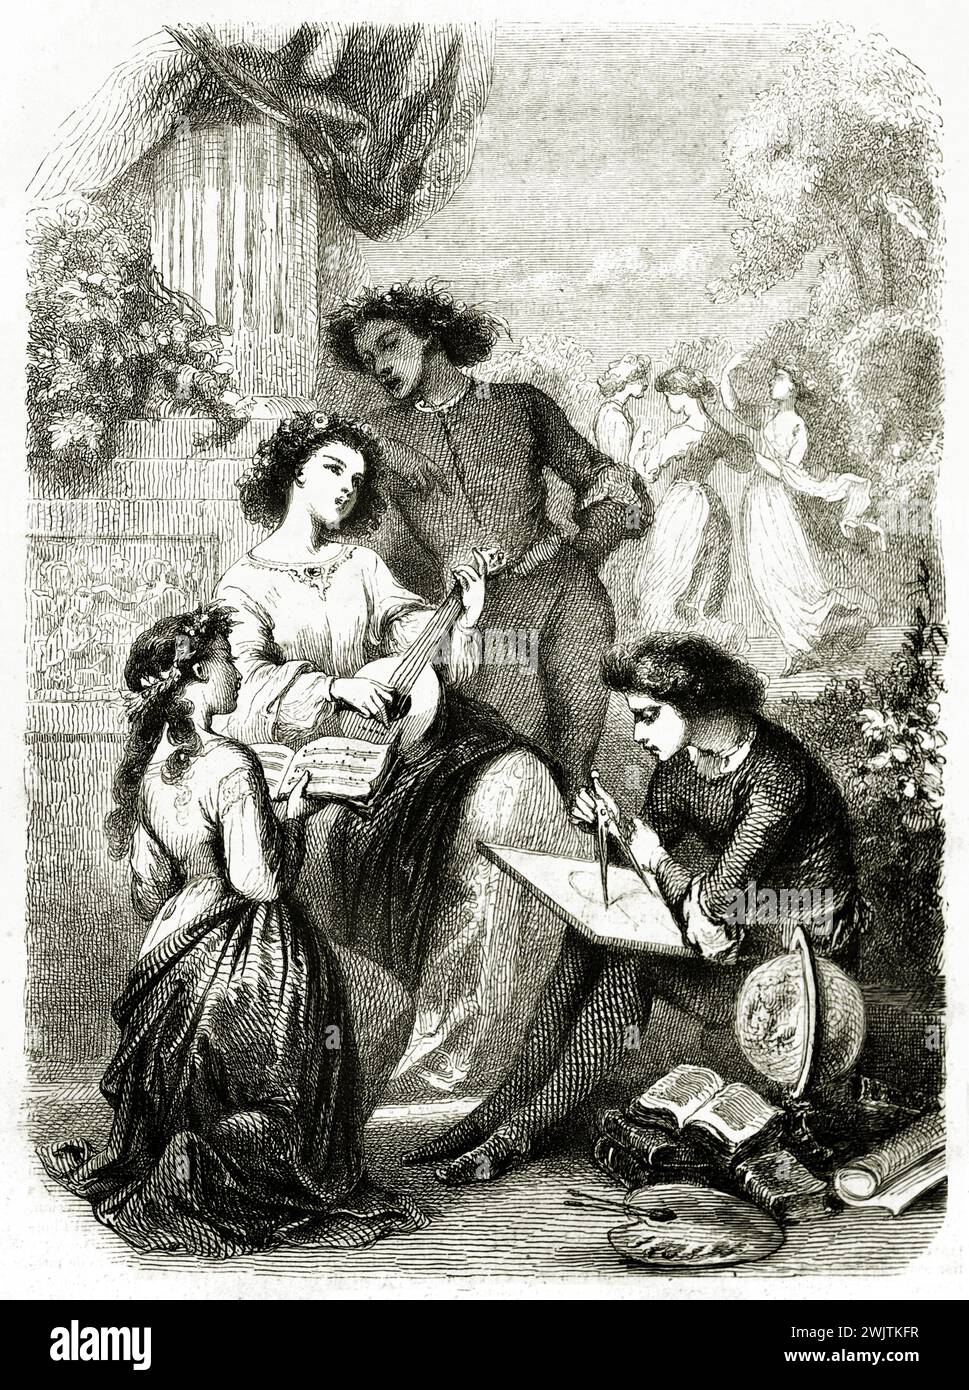 Old engraved depiction of Youth. Created by Tony Johannot, published on magasin Pittoresque, Paris, 1852 Stock Photo